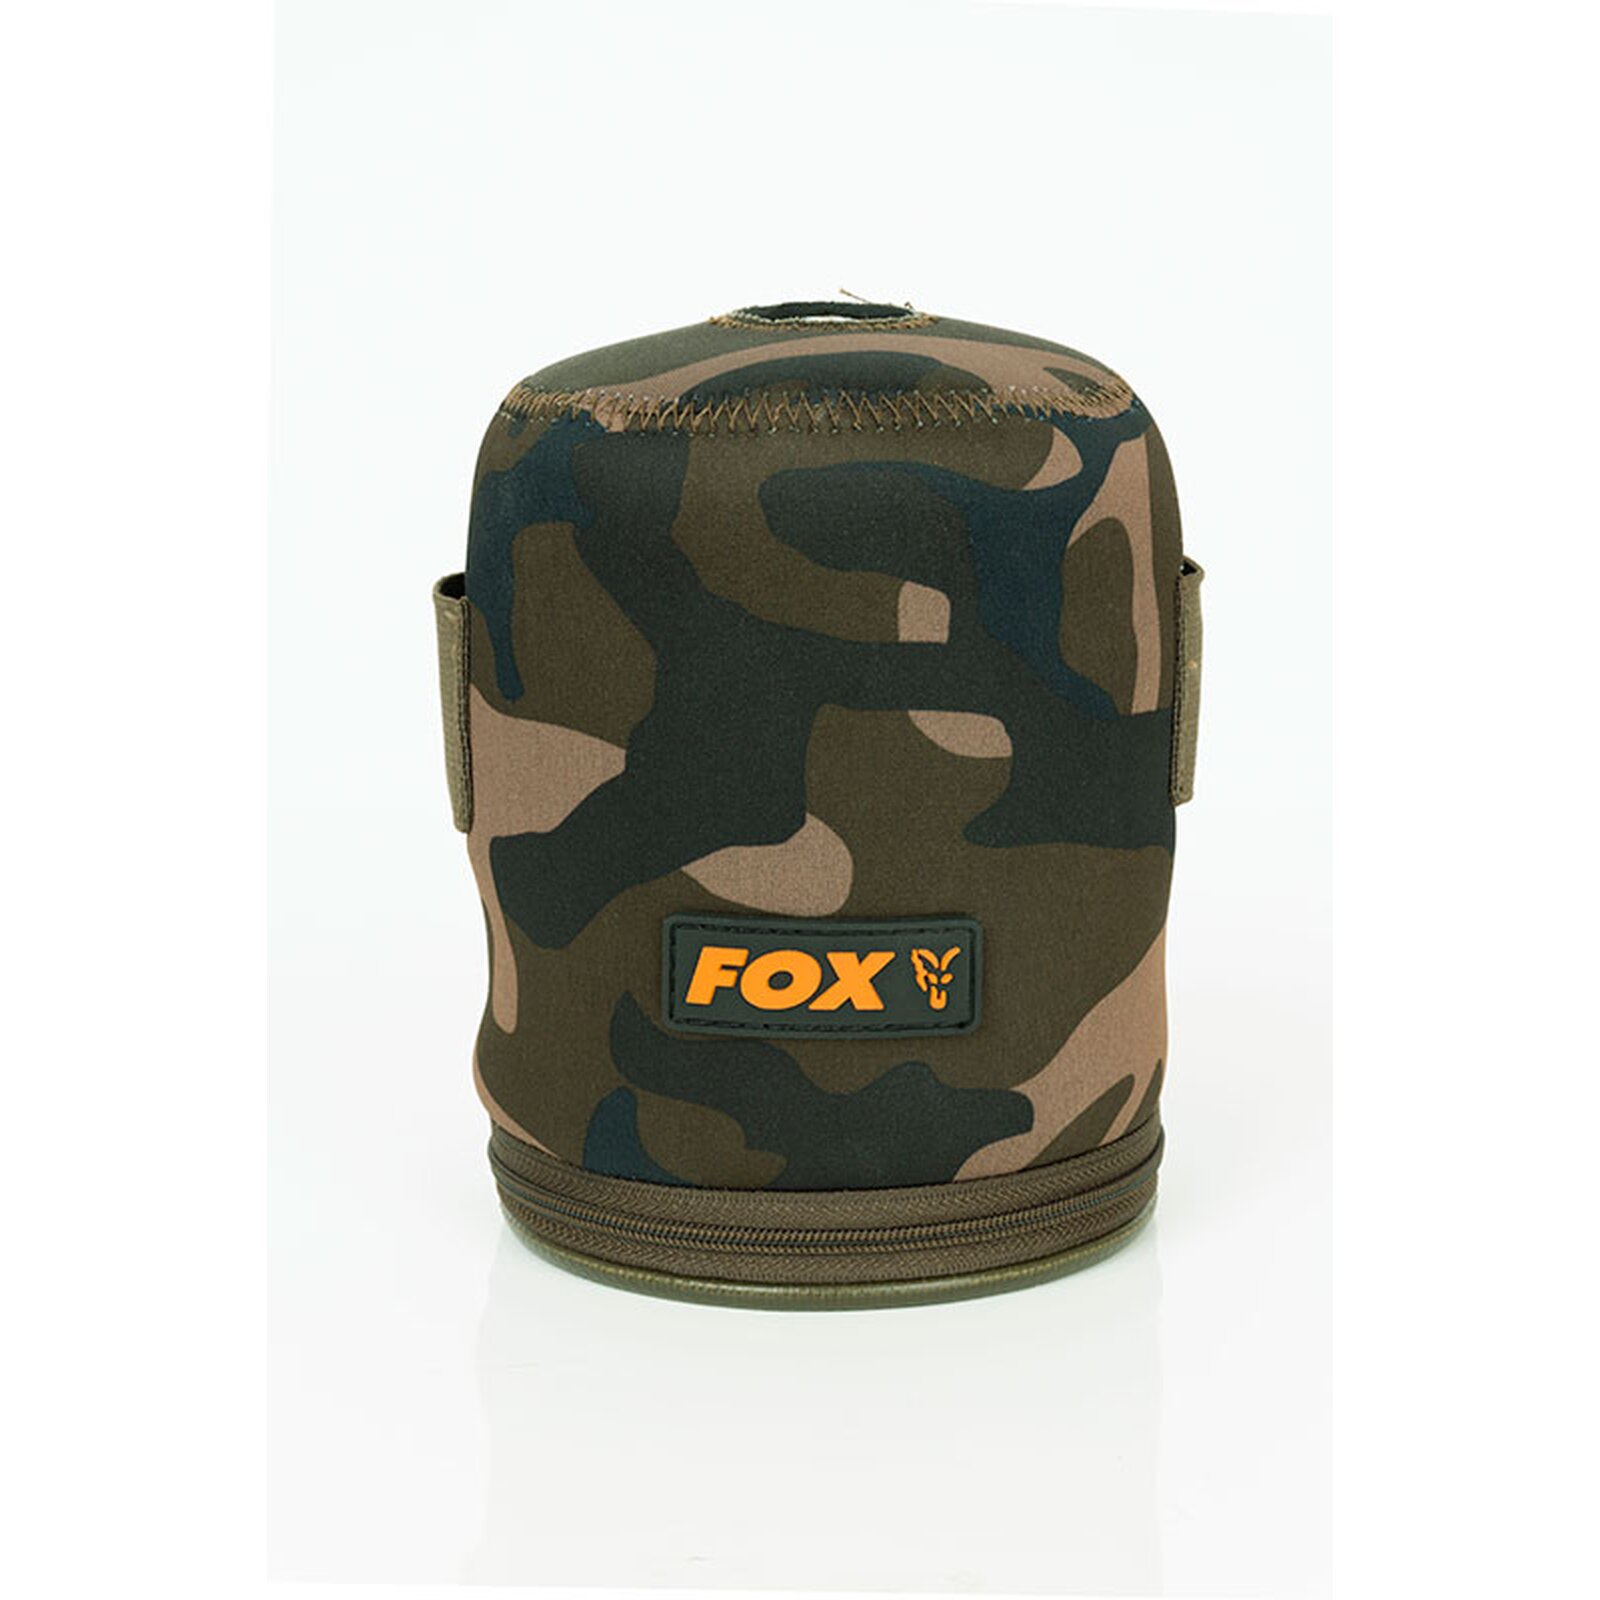 FOX Camo Neoprene Gas cannister Cover